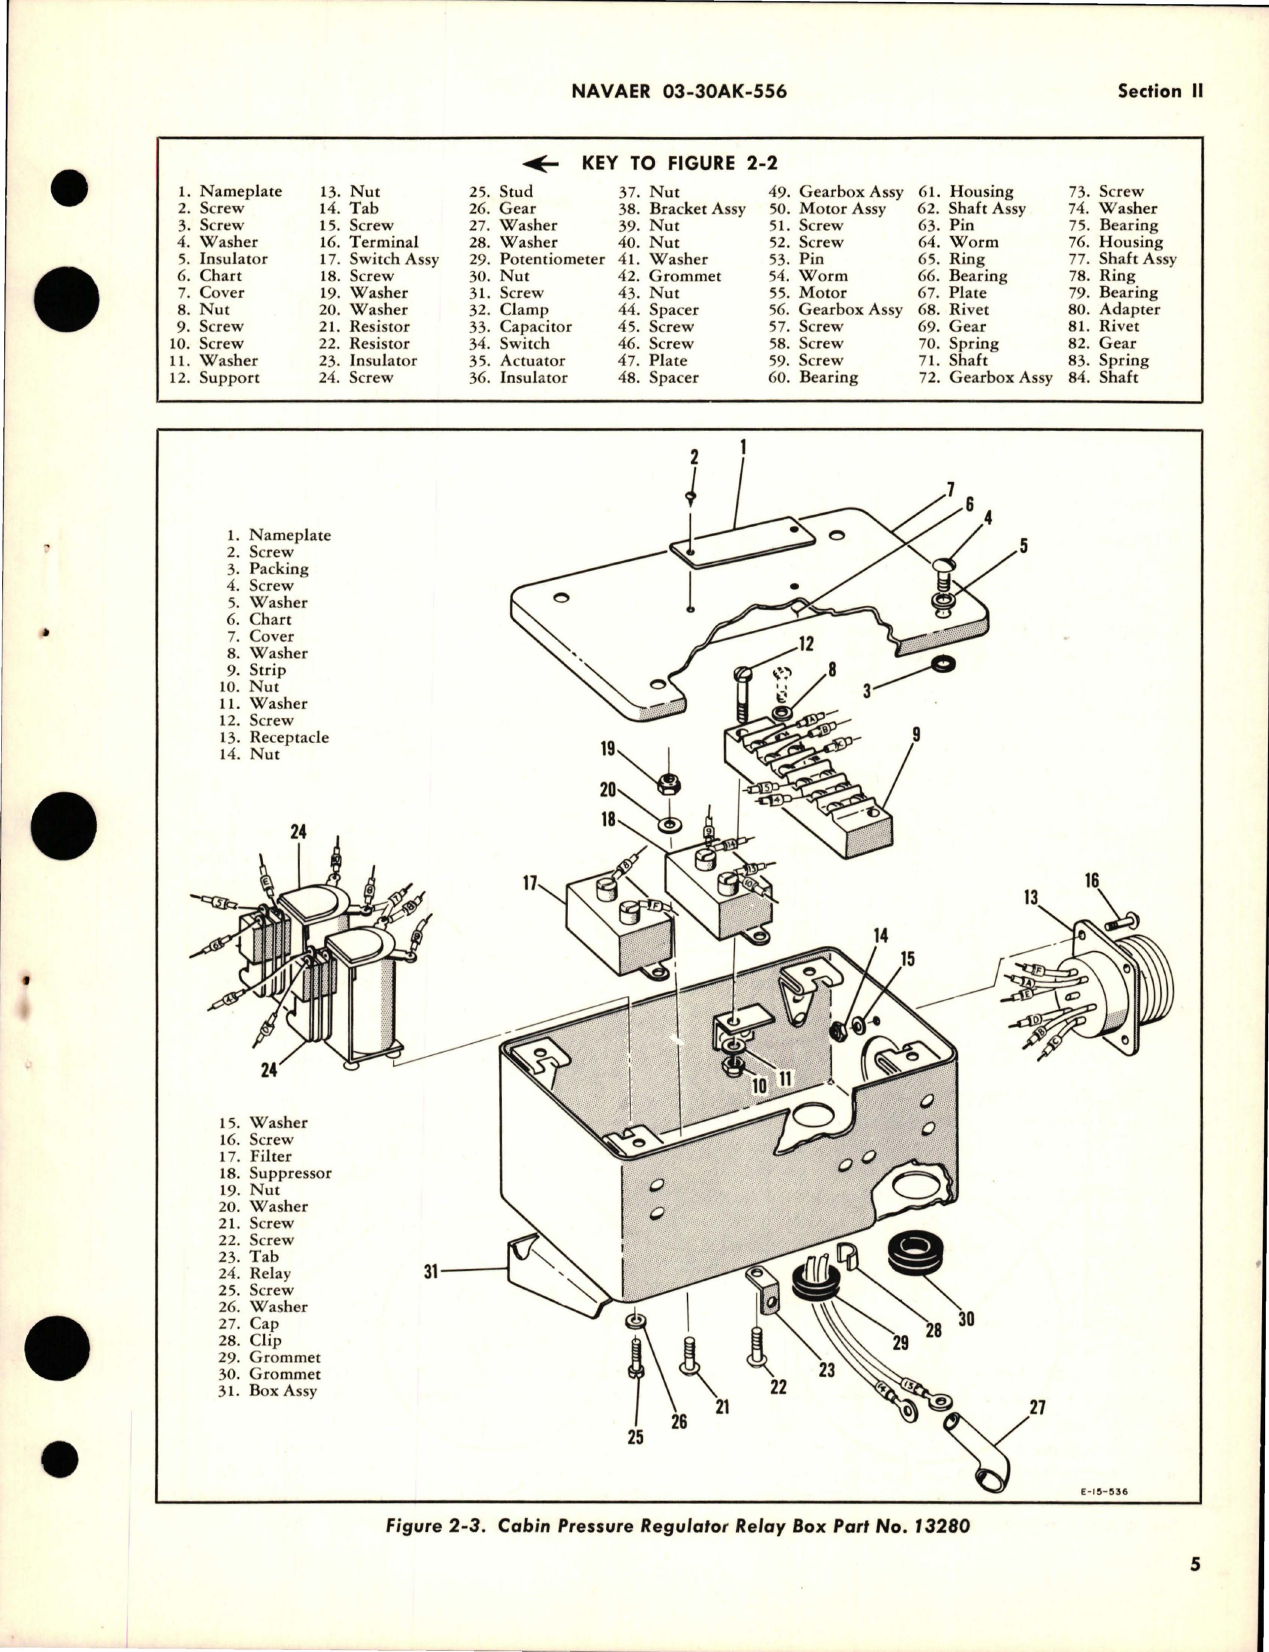 Sample page 7 from AirCorps Library document: Overhaul Instructions for Cabin Air Pressure Outflow Valve Control - Part 102006-750 